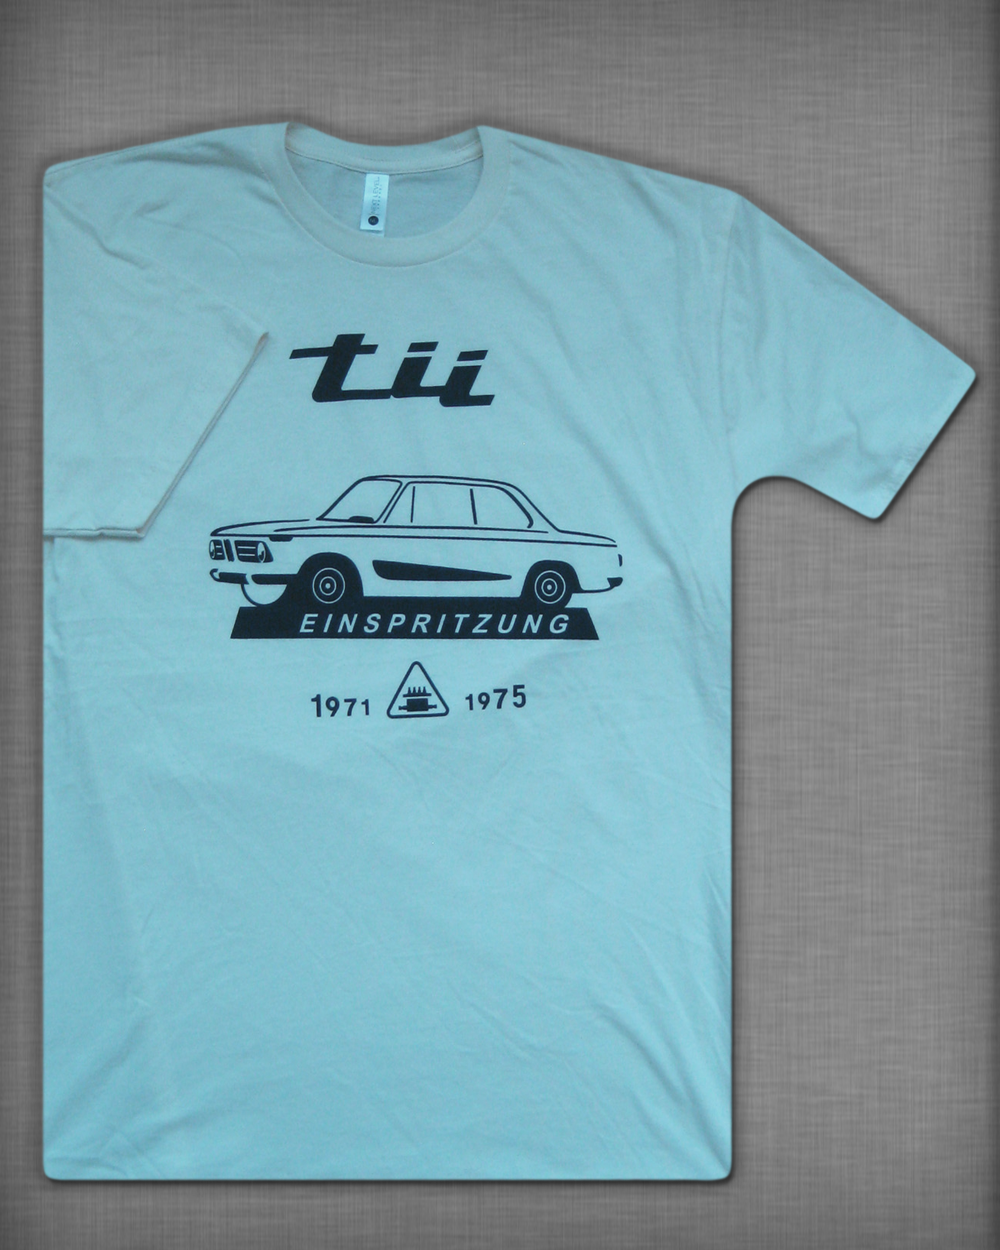 Tii Shirt + Badge + Decal Package